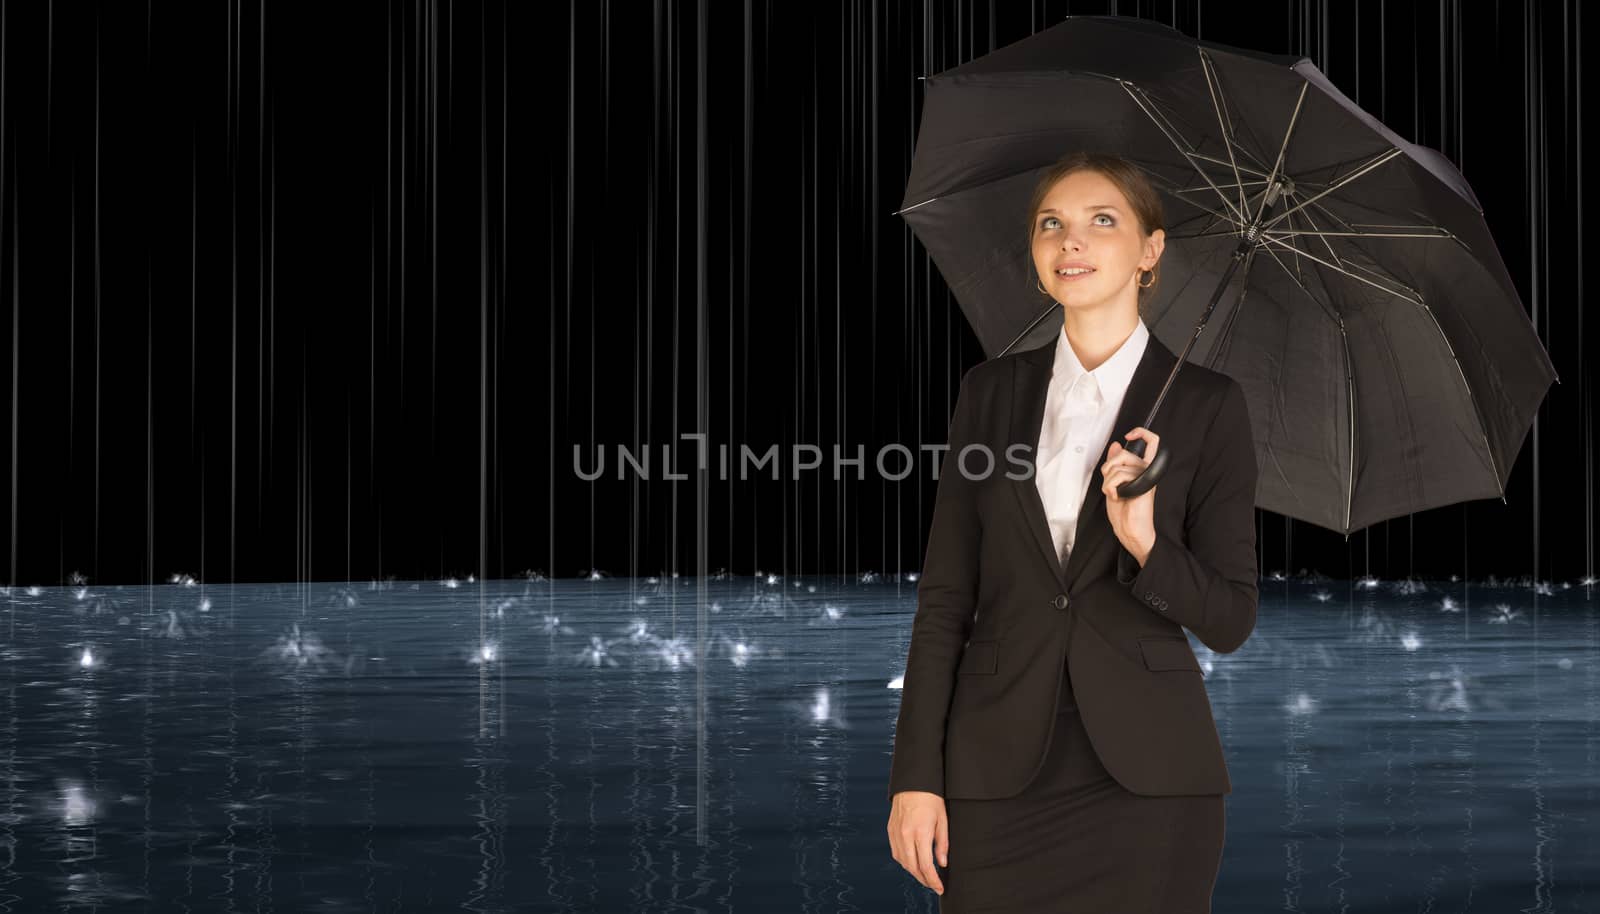 Businesswoman holding umbrella. Rain and surface waters as backdrop